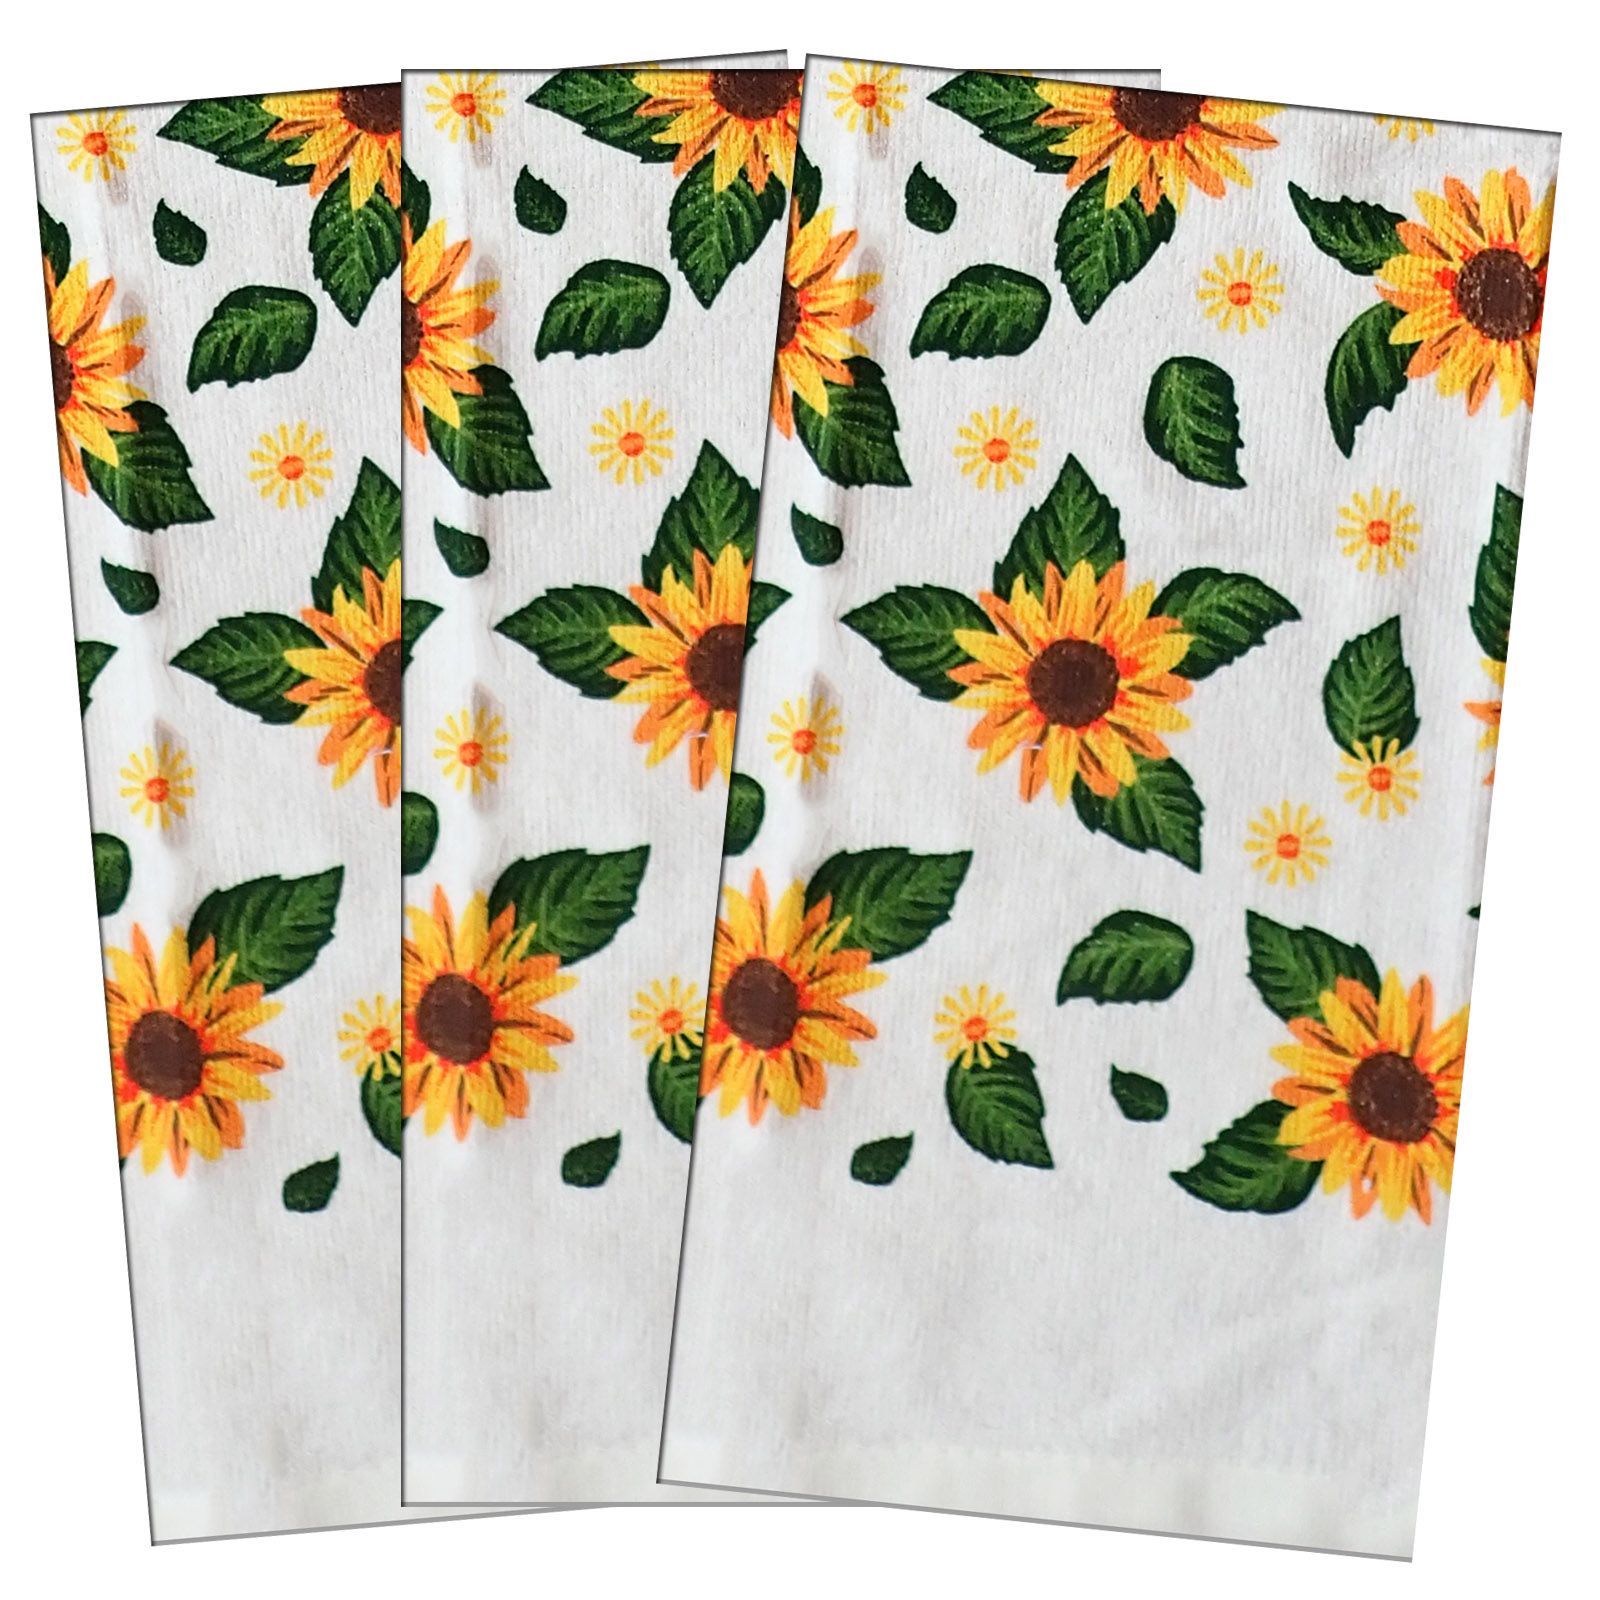 Quick Dry Kitchen Towel Set 15x25 In, Sunflower Design Absorbent & Durable  Cleaning Cloths For Home Baking & Daily Use From Gefirstall, $6.27